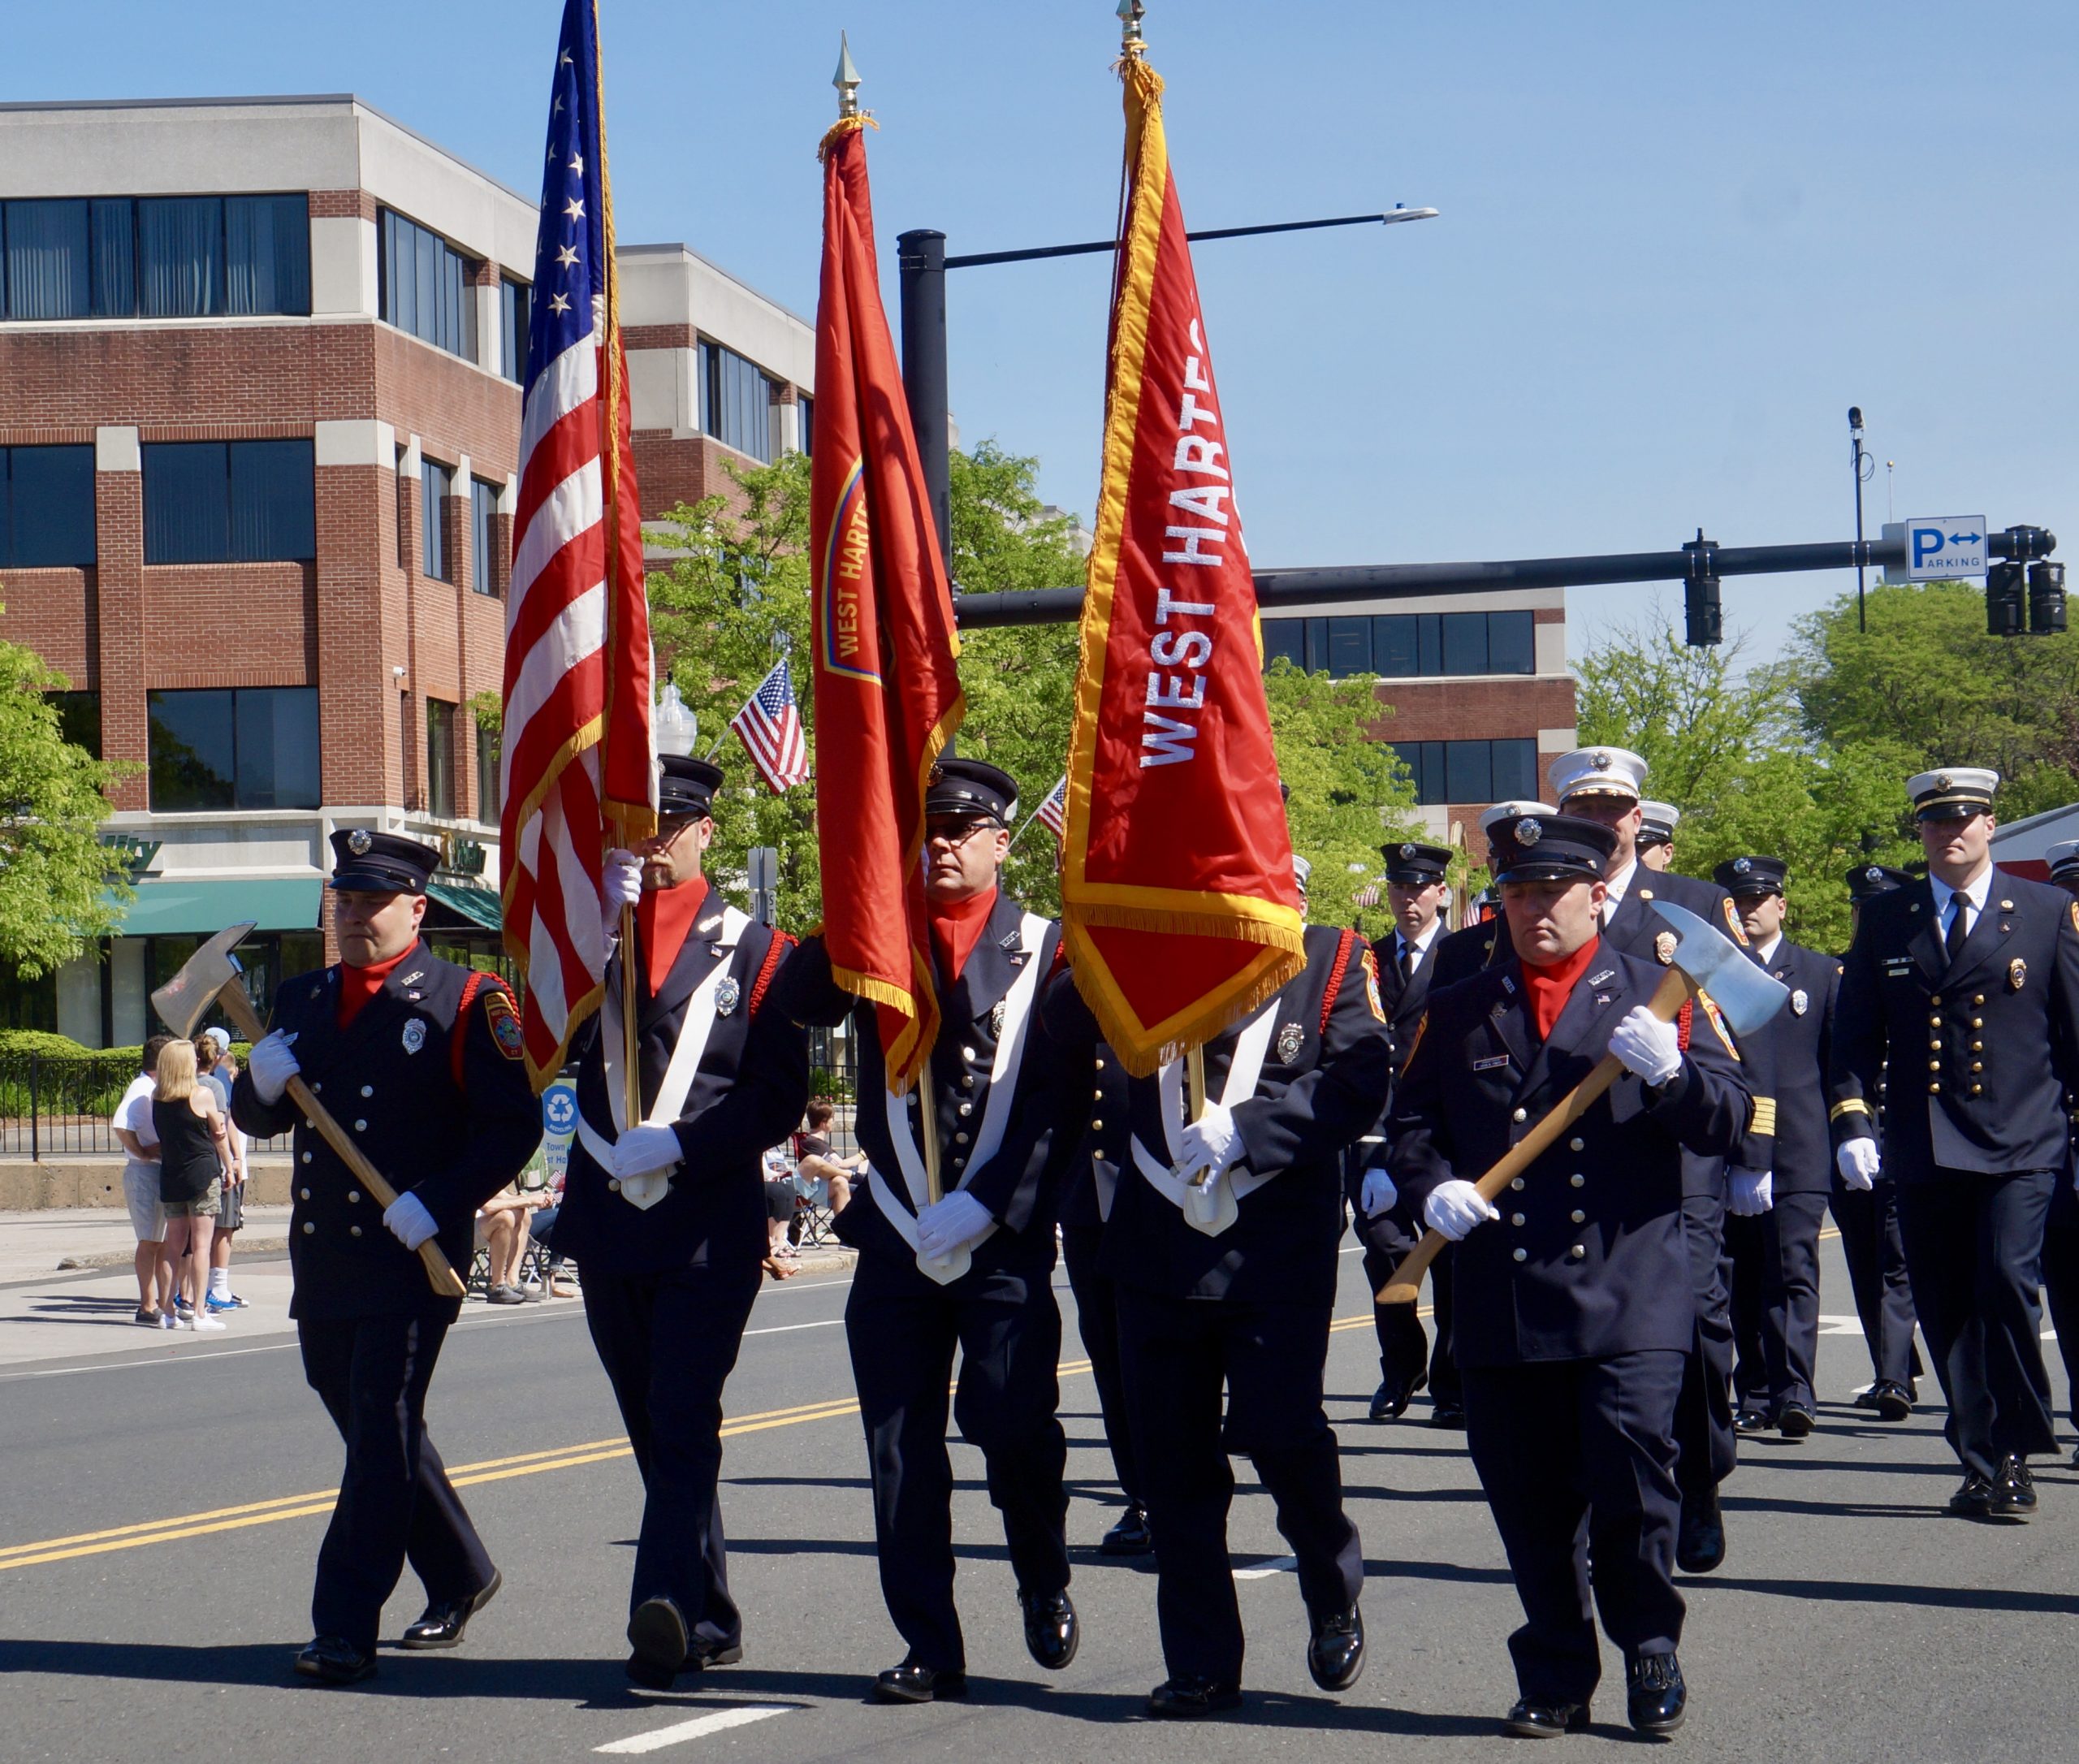 What You Need to Know About Memorial Day 2022 in West Hartford WeHa